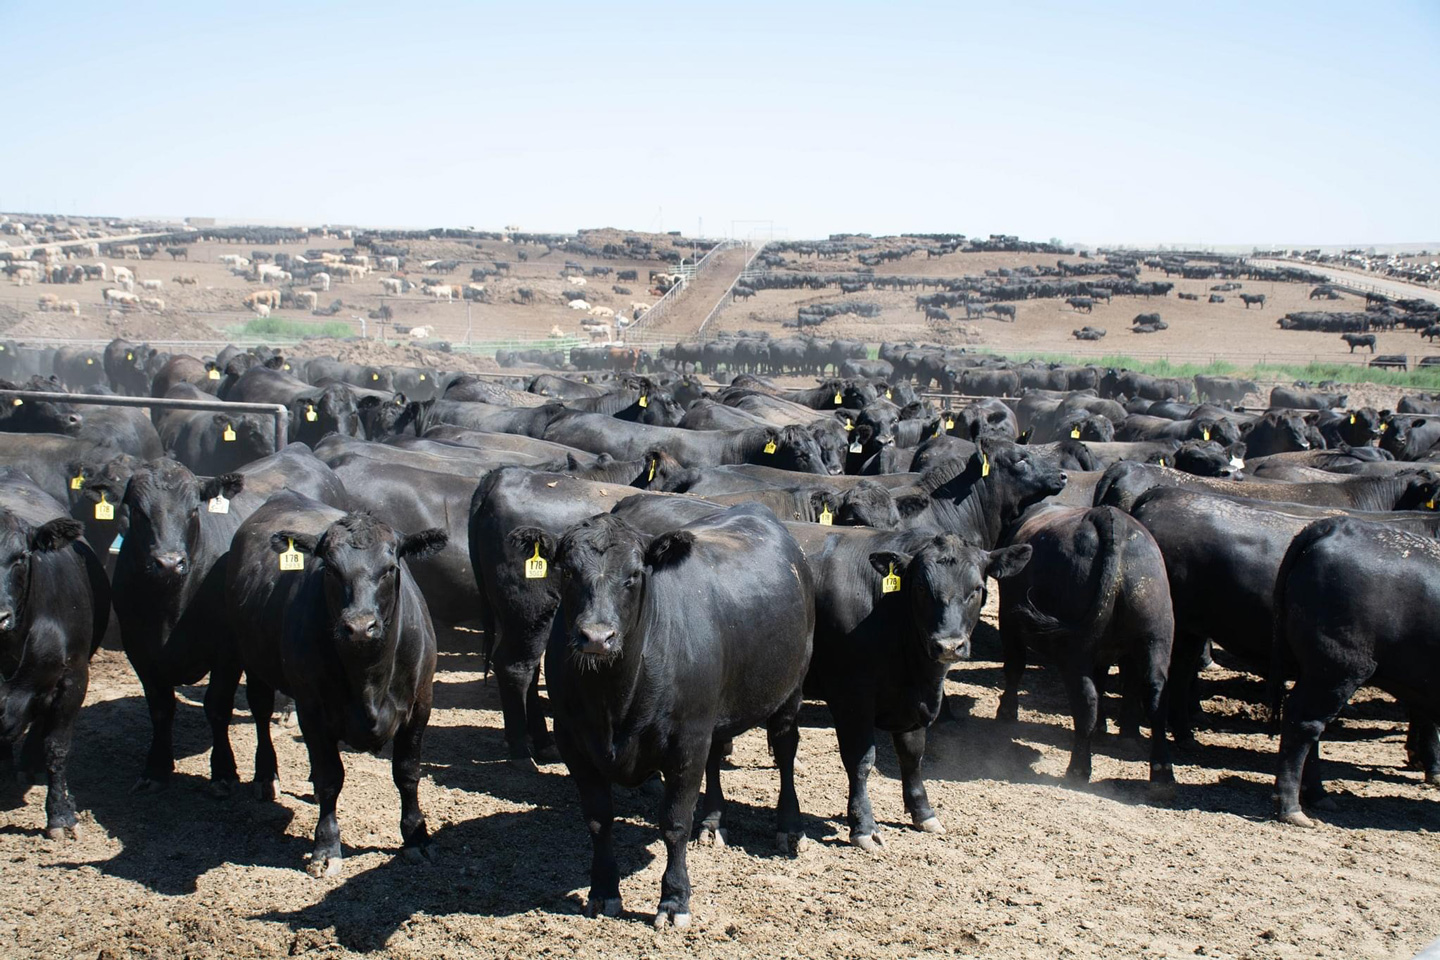 Black Angus Steer - Foster Cattle